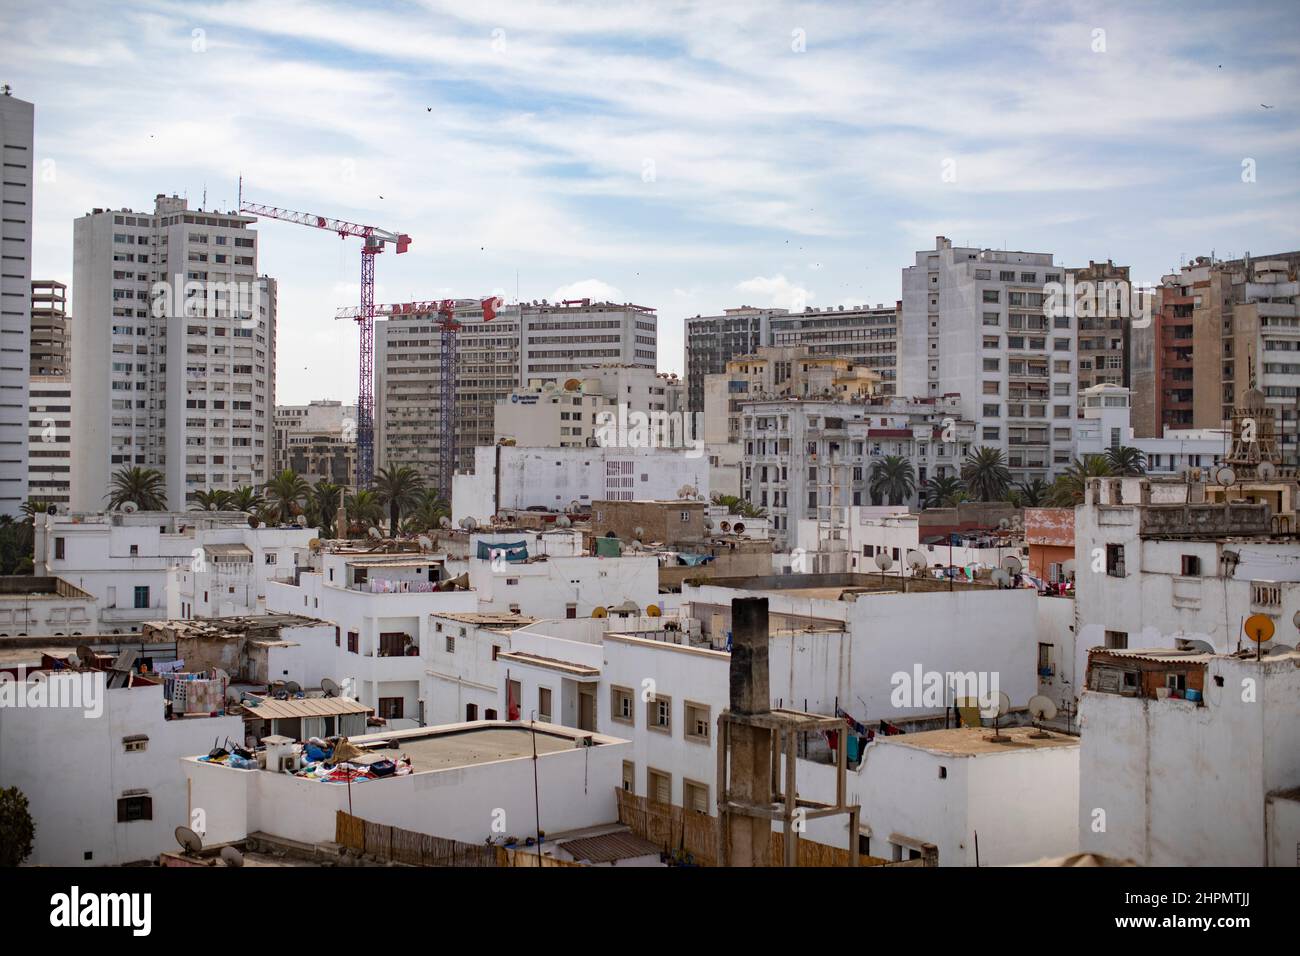 Casablanca, Morocco. September, 2019 - photo by Jake Lyell for the IMF. Stock Photo